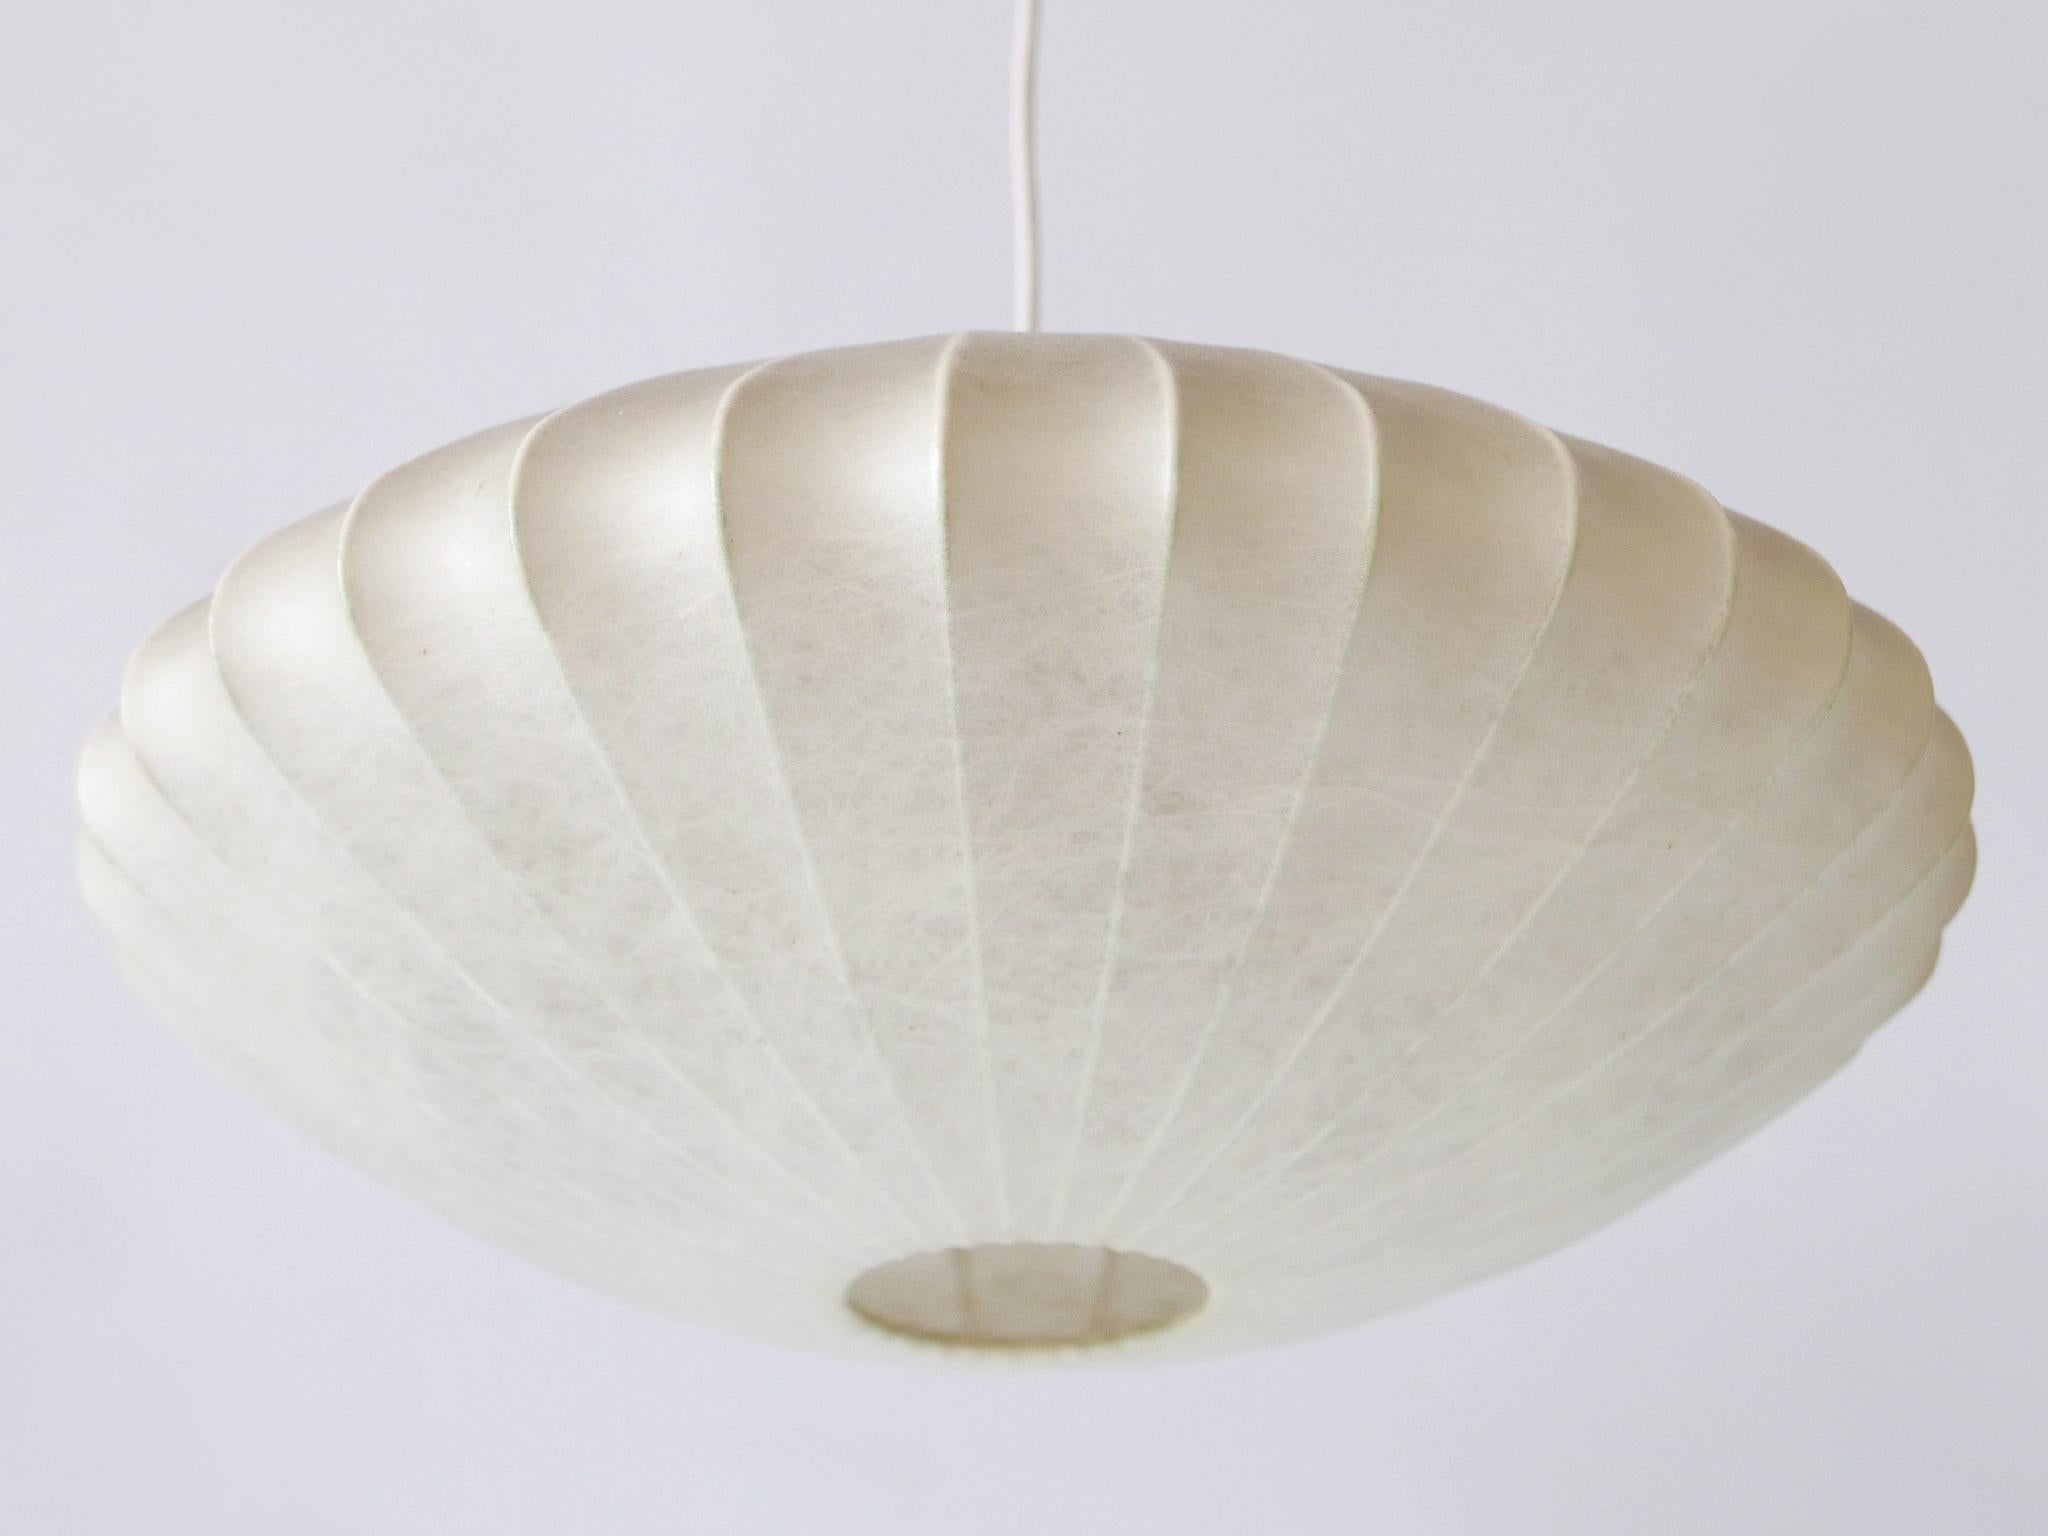 Large, rare and highly decorative Mid-Century Modern cocoon pendant lamp or hanging light. Designed & manufactured probably by Goldkant Leuchten, Germany, 1960s.

Executed in sprayed latex material and metal, the pendant lamp needs 1 x E27 / E26